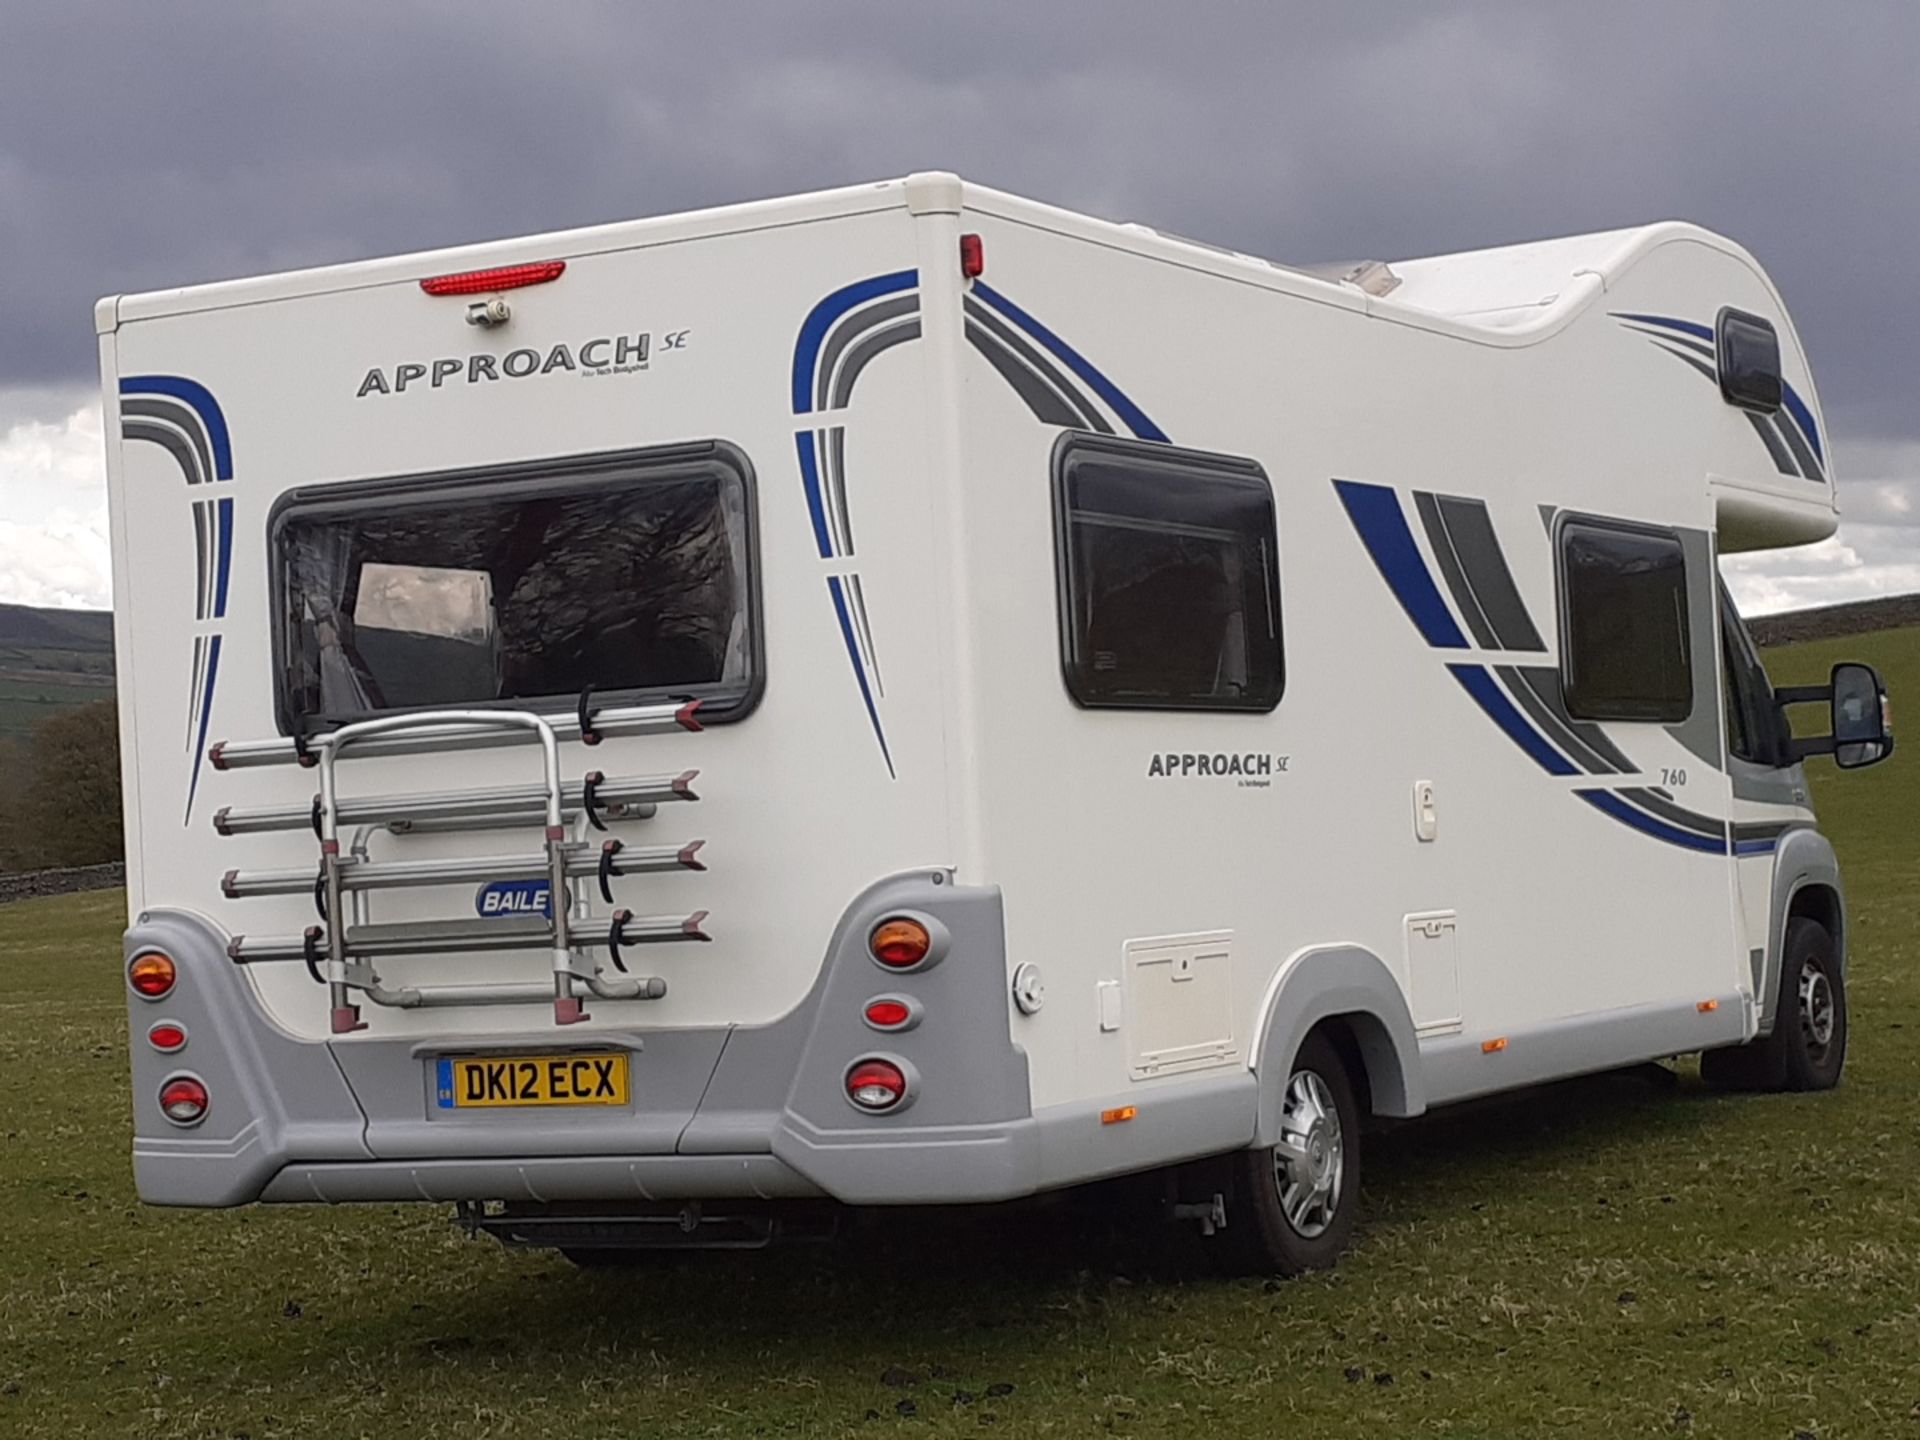 2012 BAILEY APPROACH 760 SE LUXURY 6 BERTH MOTORHOME £10K OF EXTRAS, 30,000 MILES FROM NEW - Image 10 of 31